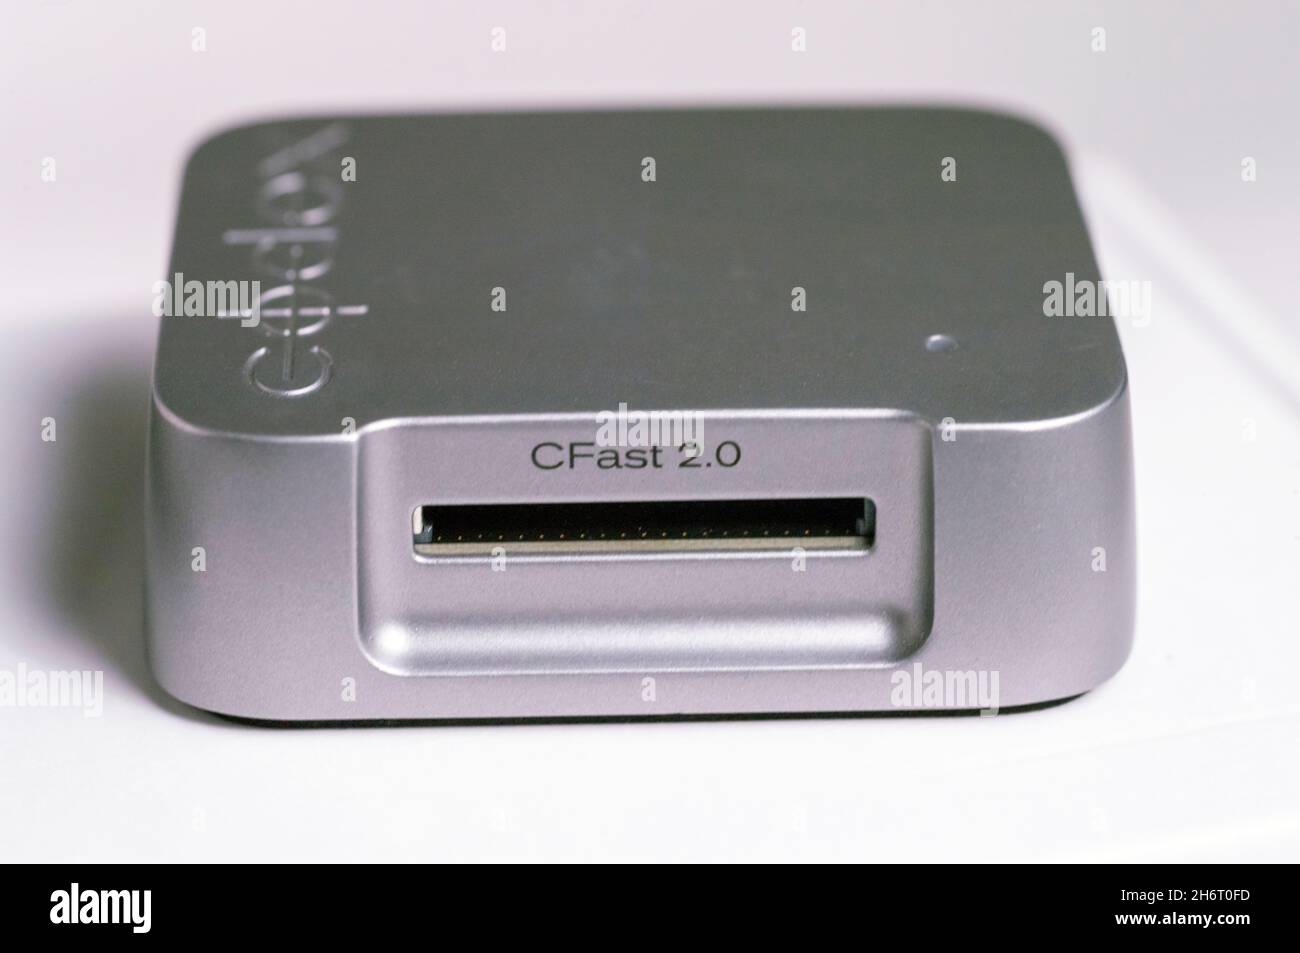 CFast card reader made by Codex and sold by Arri. It's a very high quality media reader for the CFast media cards used in hi end video production. Stock Photo